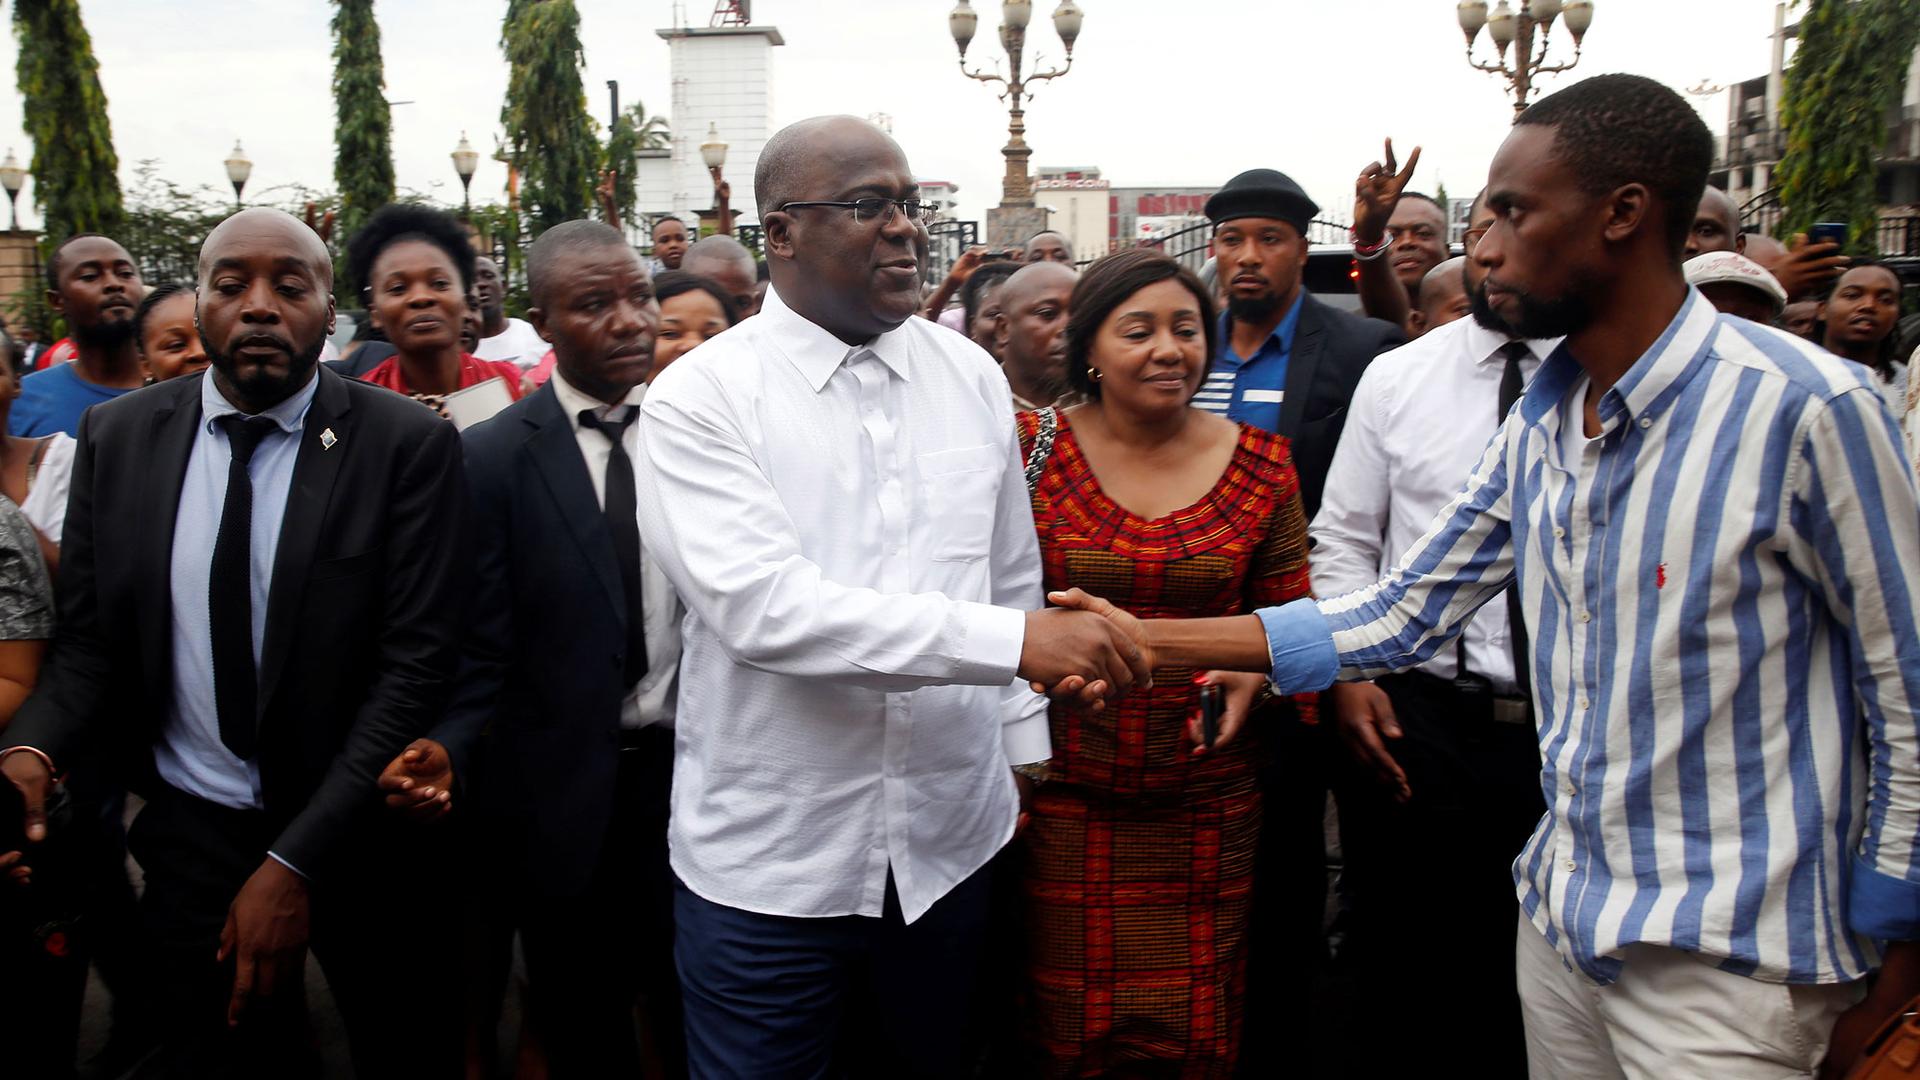 Felix Tshisekedi is shown in a white shirt shaking hands with a suppoert in the streets of Kinshasa, Democratic Republic of Congo.